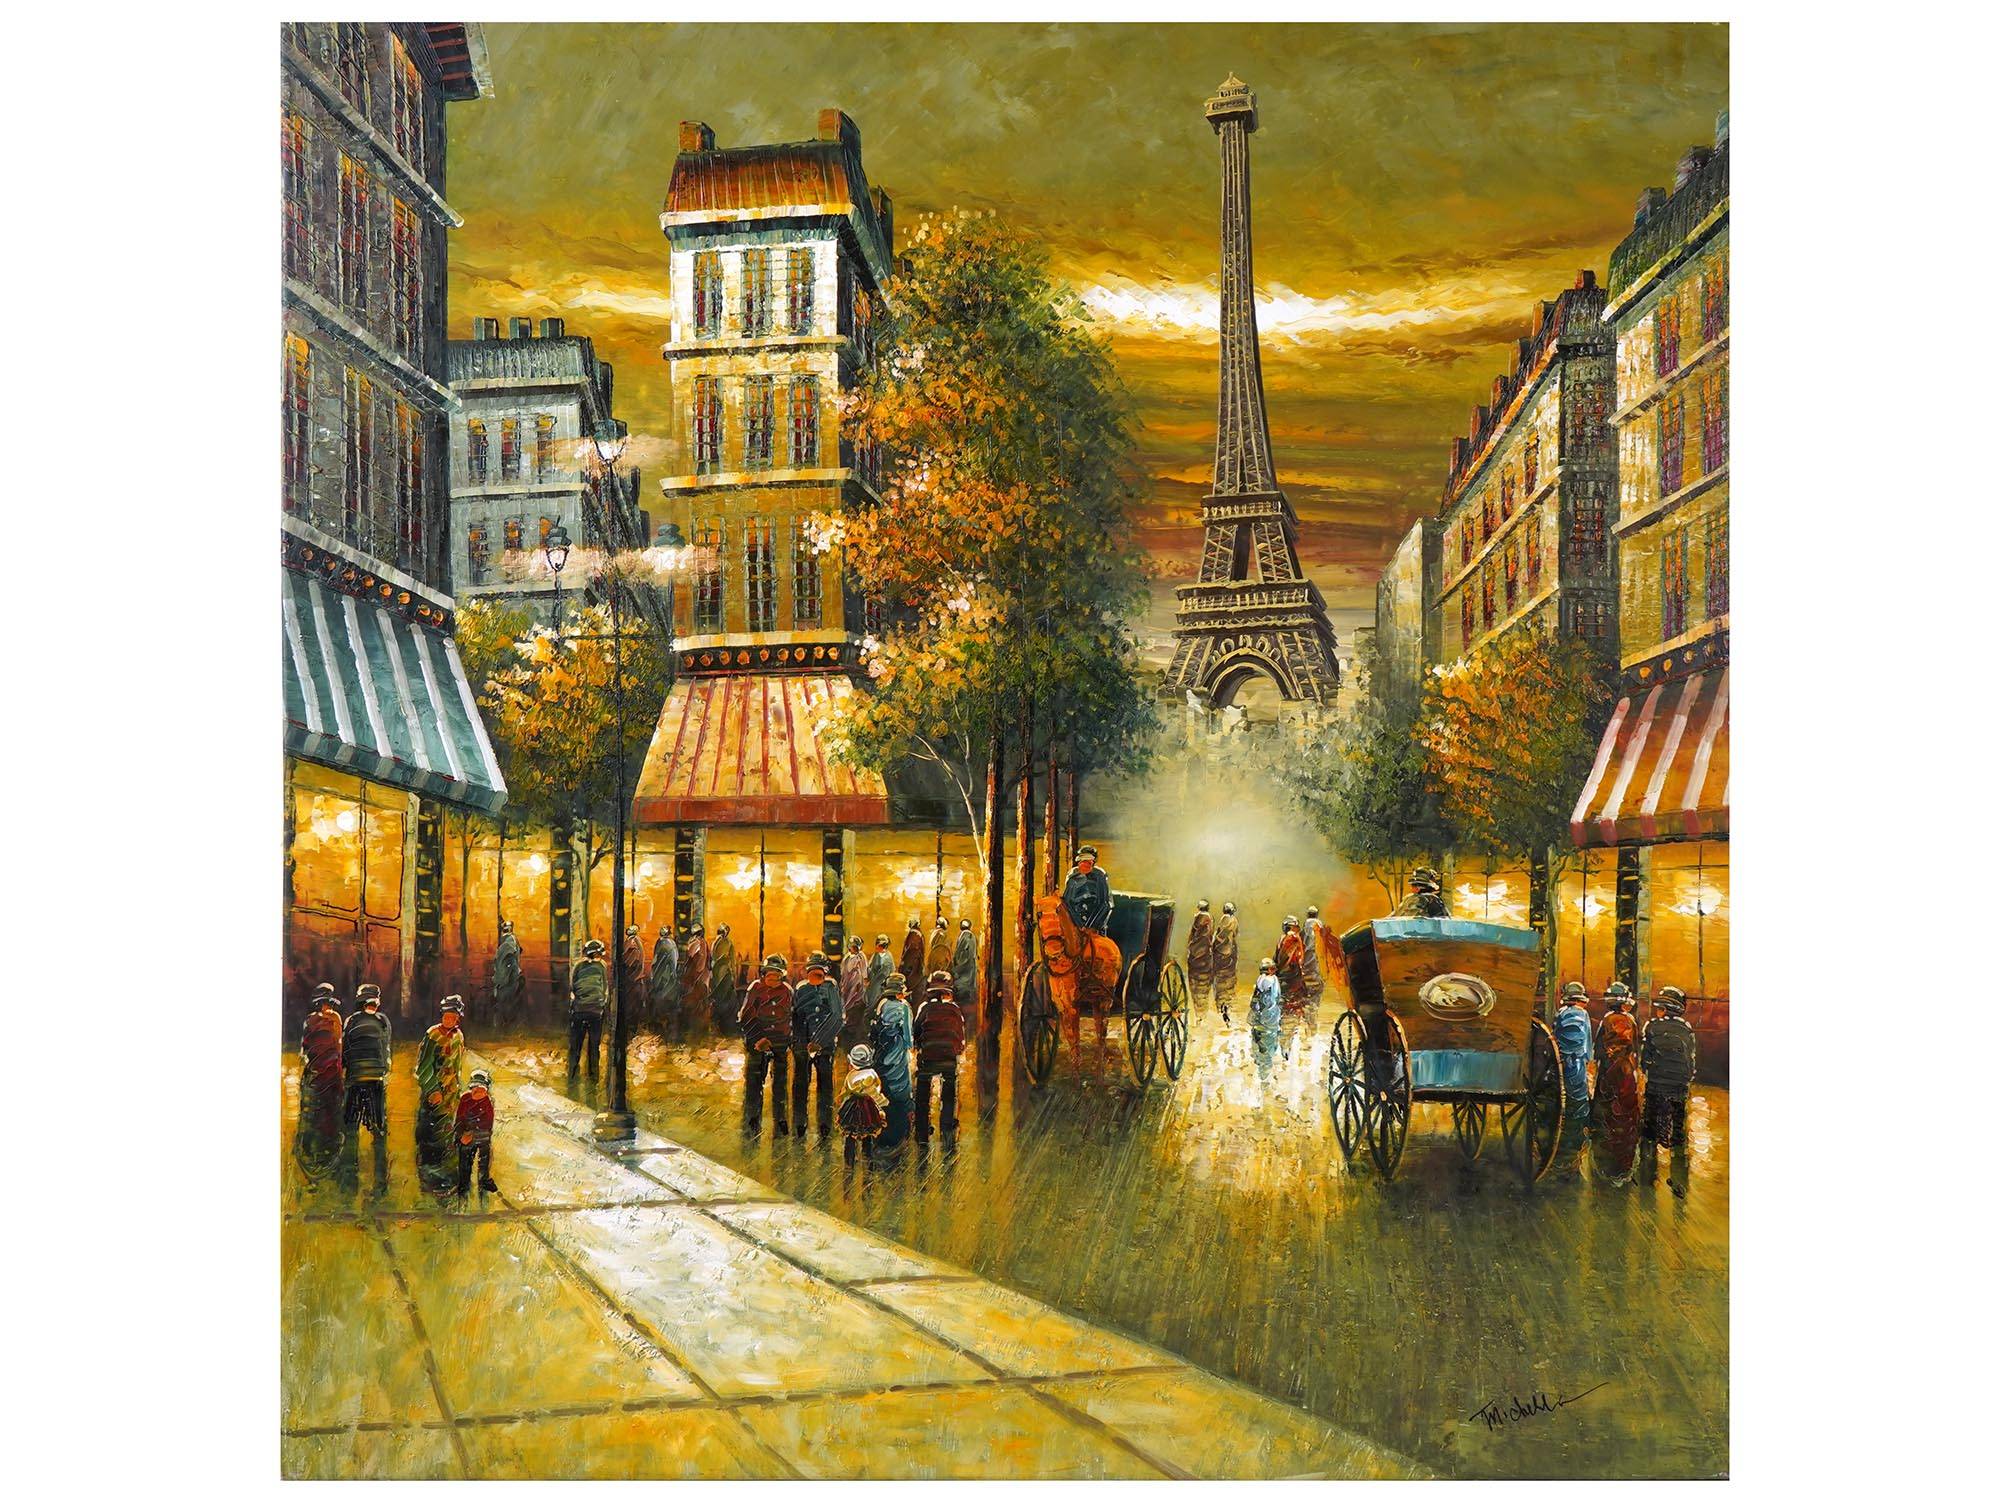 ACRYLIC PARIS CITYSCAPE PAINTING BY T CHELL PIC-0